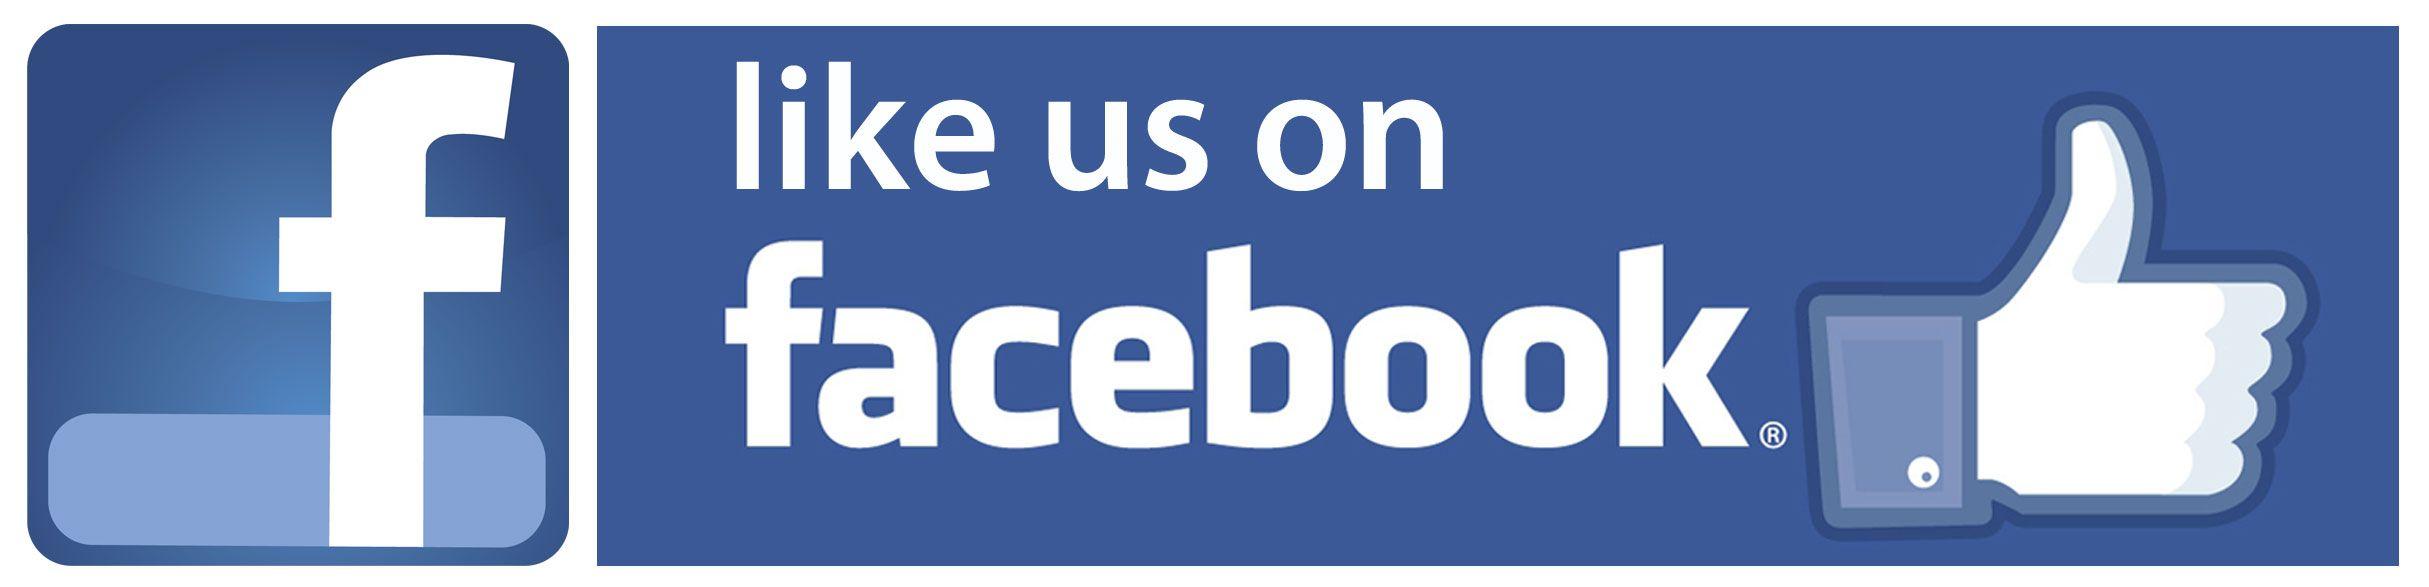 Find Us On Facebook Official Logo - City Mission Wanganui| What We Do